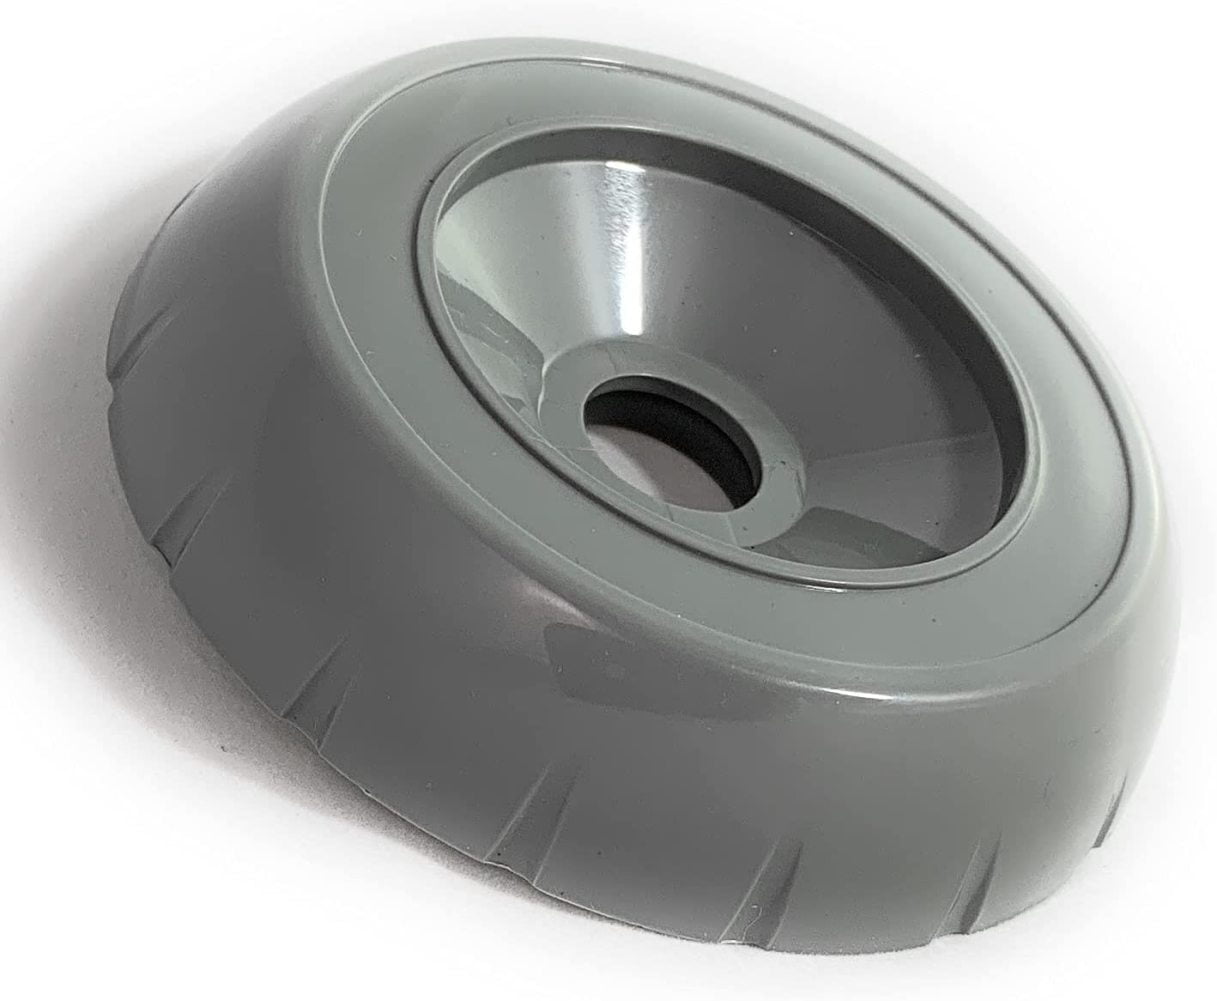 Spa Hot Tub Diverter Cap 3 3/4" Wide Gray Notched Buttress Style How To Video 